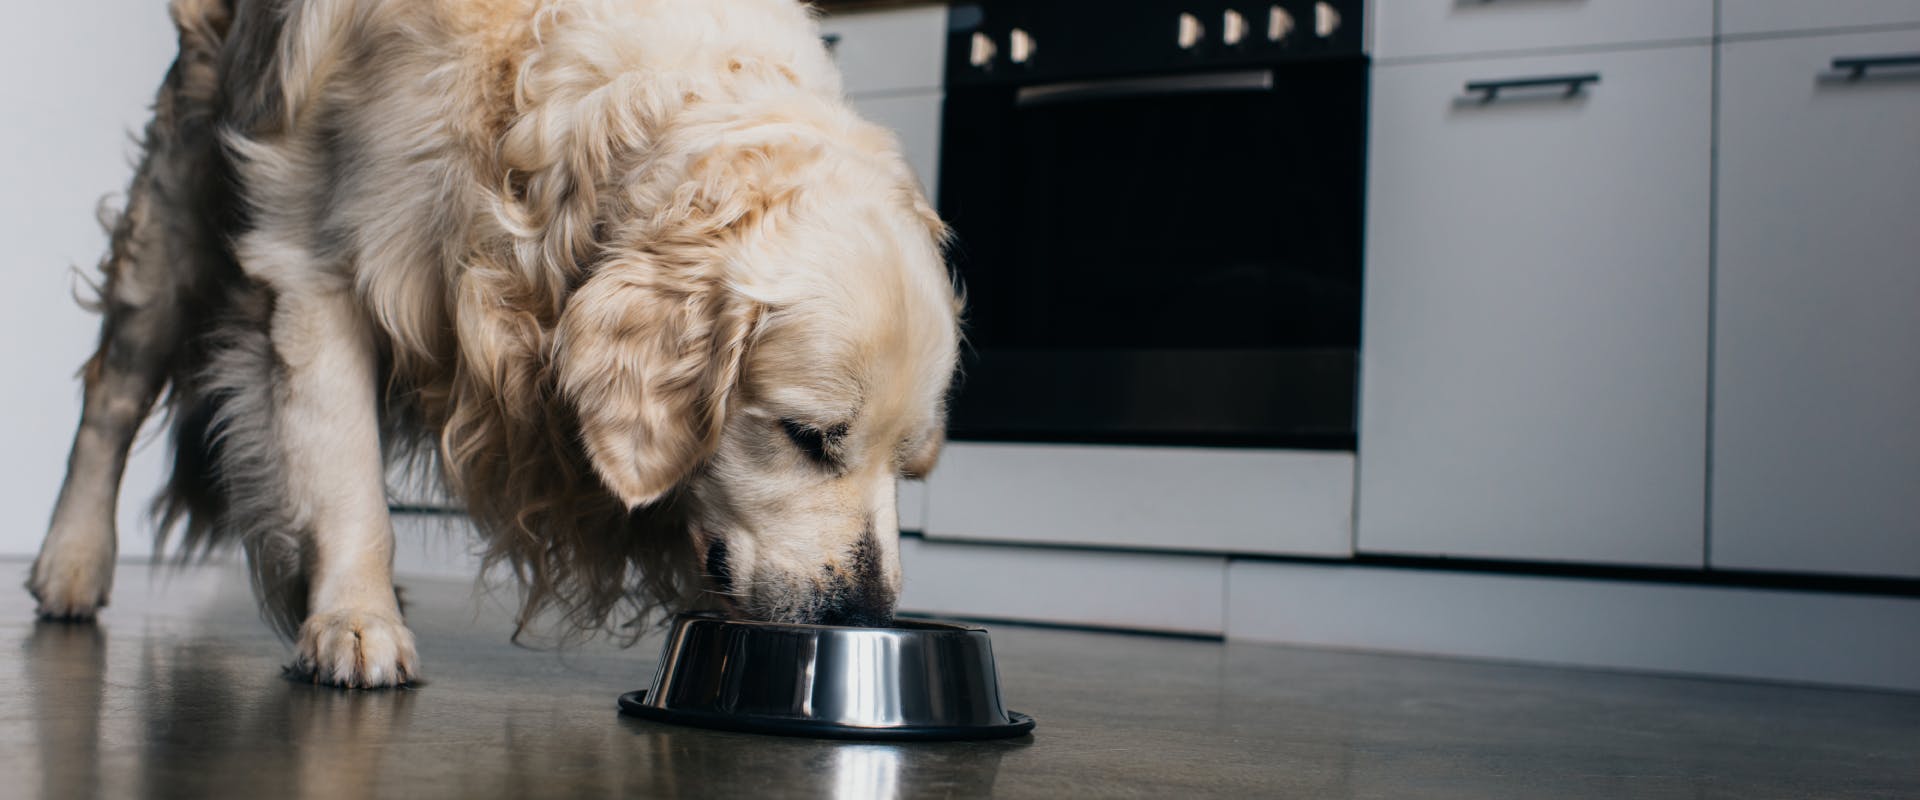 a golden retriever eating out of a silver bowl in a kitchen